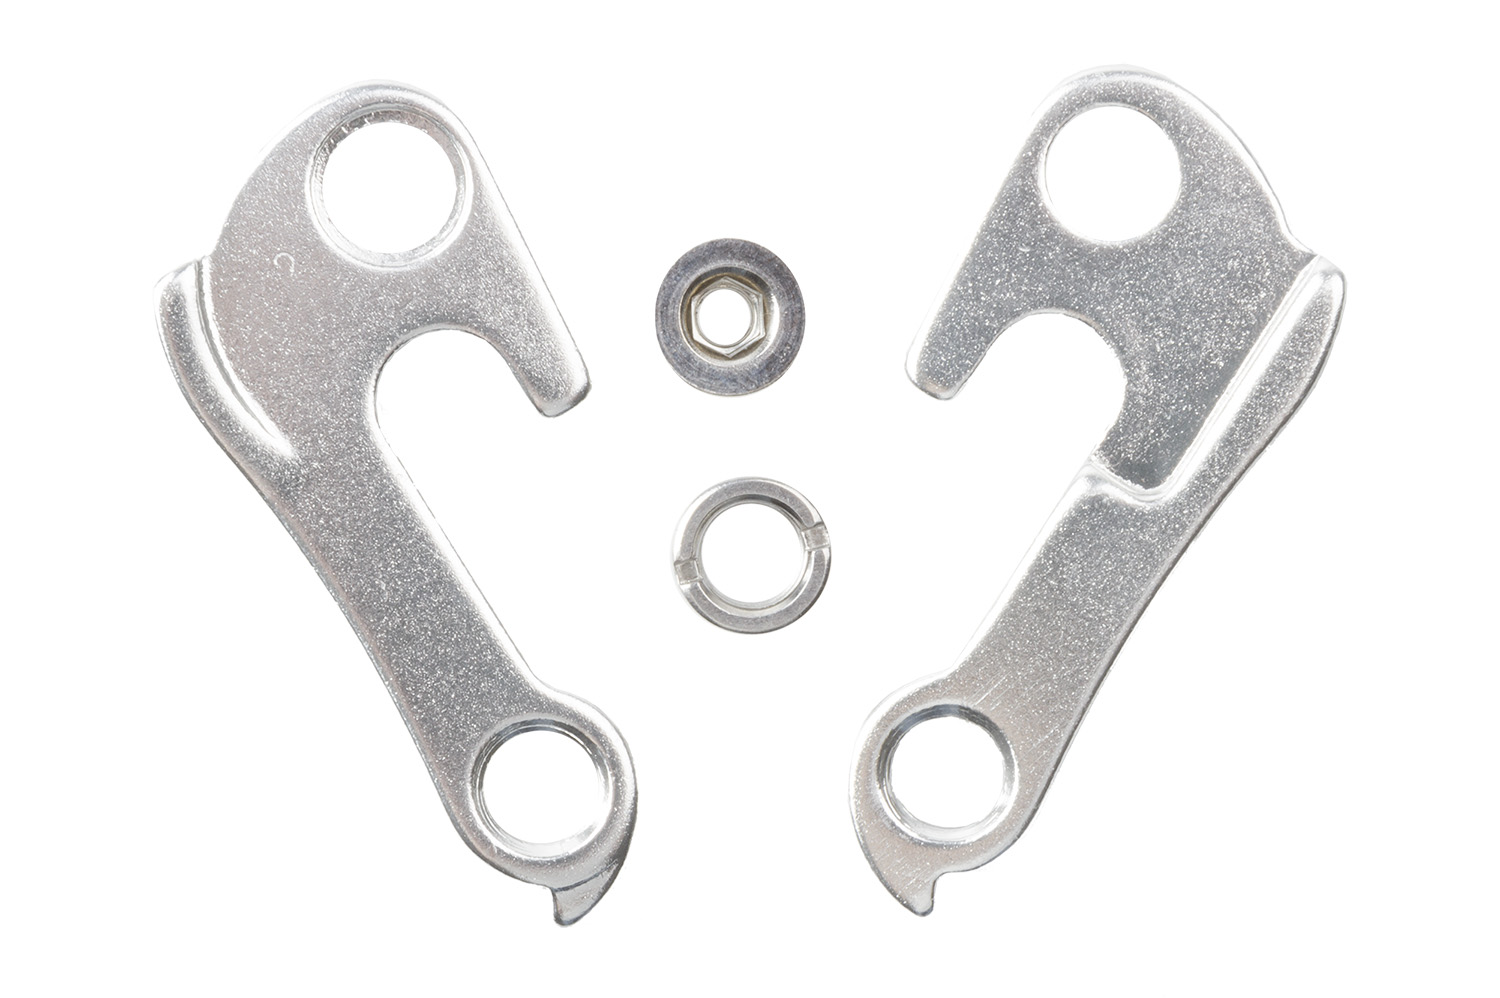 660877 S10 derailleur hanger – AVAILABLE IN SELECTED BIKE SHOPS